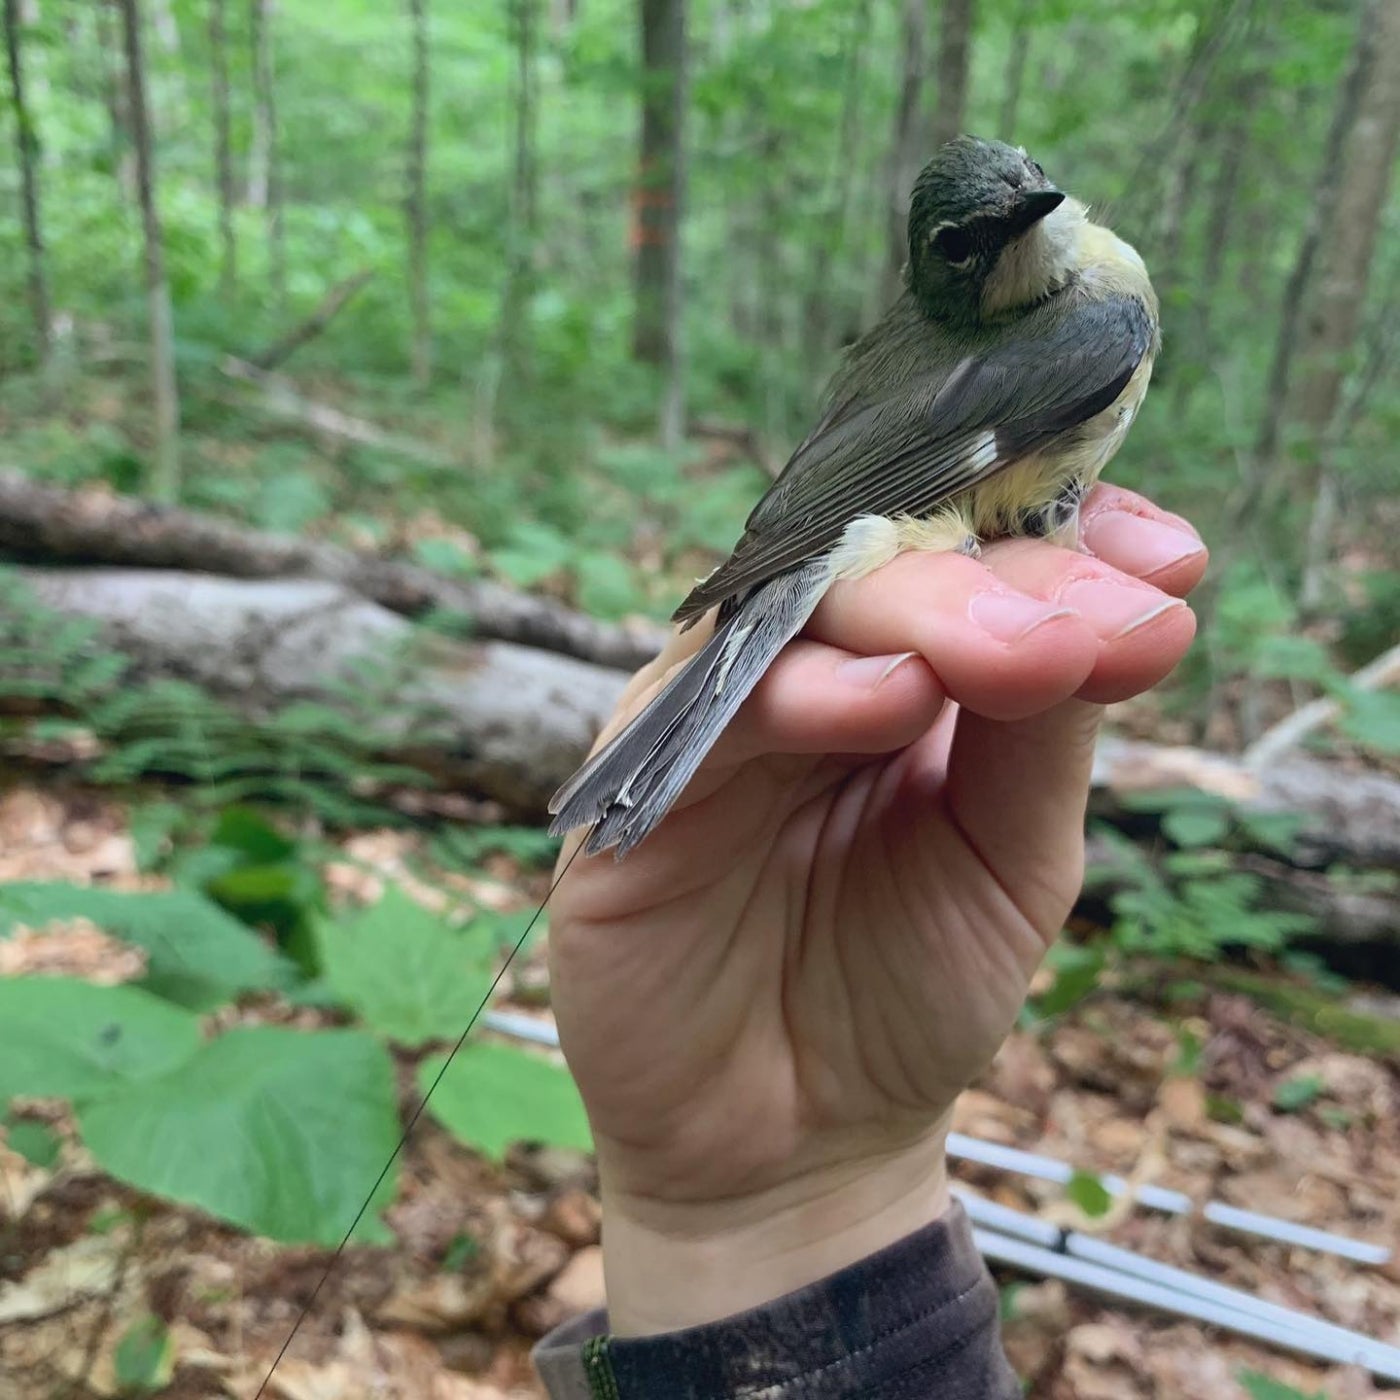 This female black-throated blue warbler bird held in a researcher's hand has been fitted with a transmitter, which will communicate with special radio towers and help shed light on their movements.